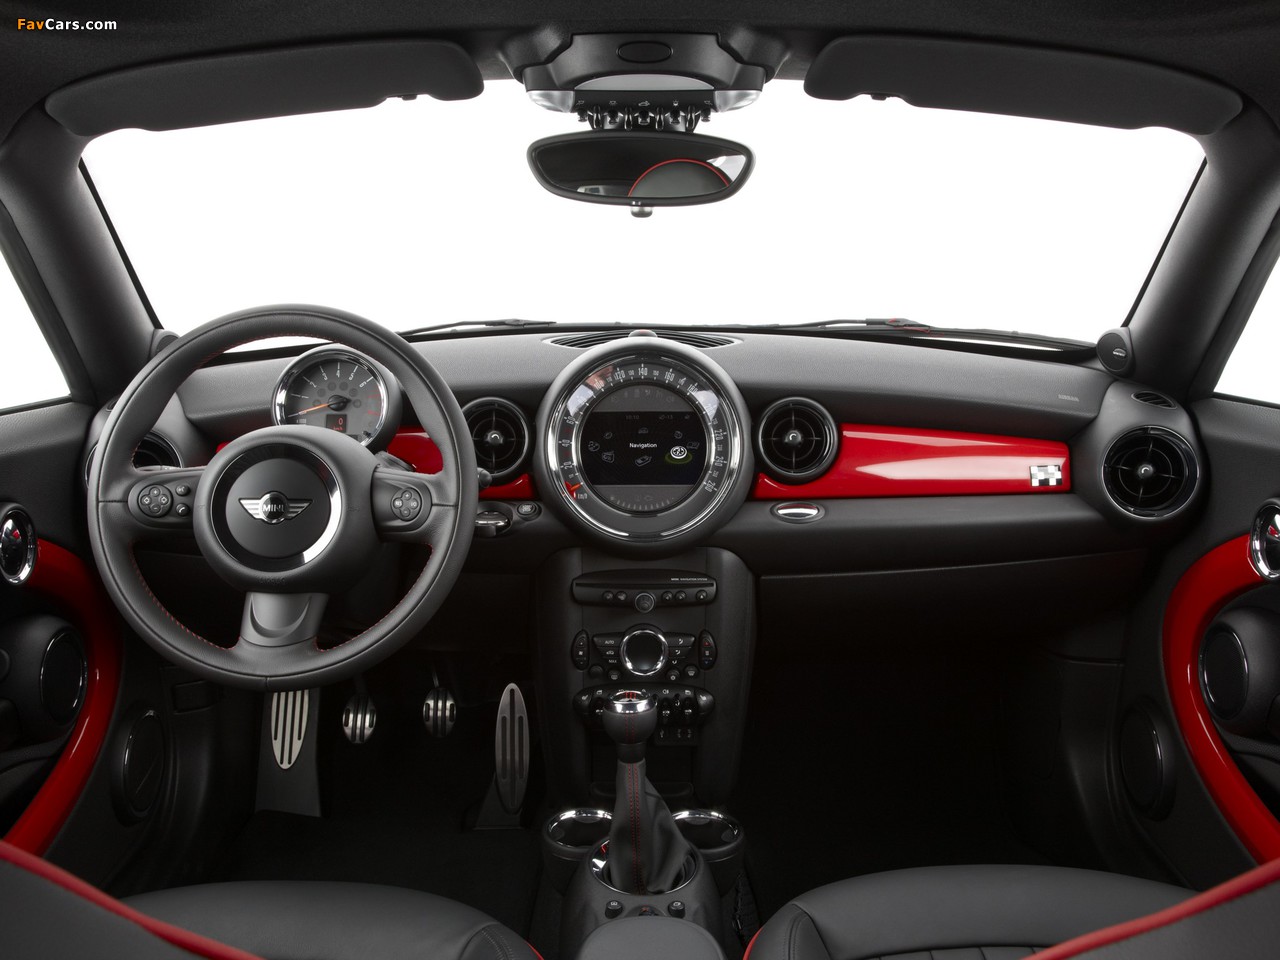 MINI John Cooper Works Coupe (R58) 2011 pictures (1280 x 960)